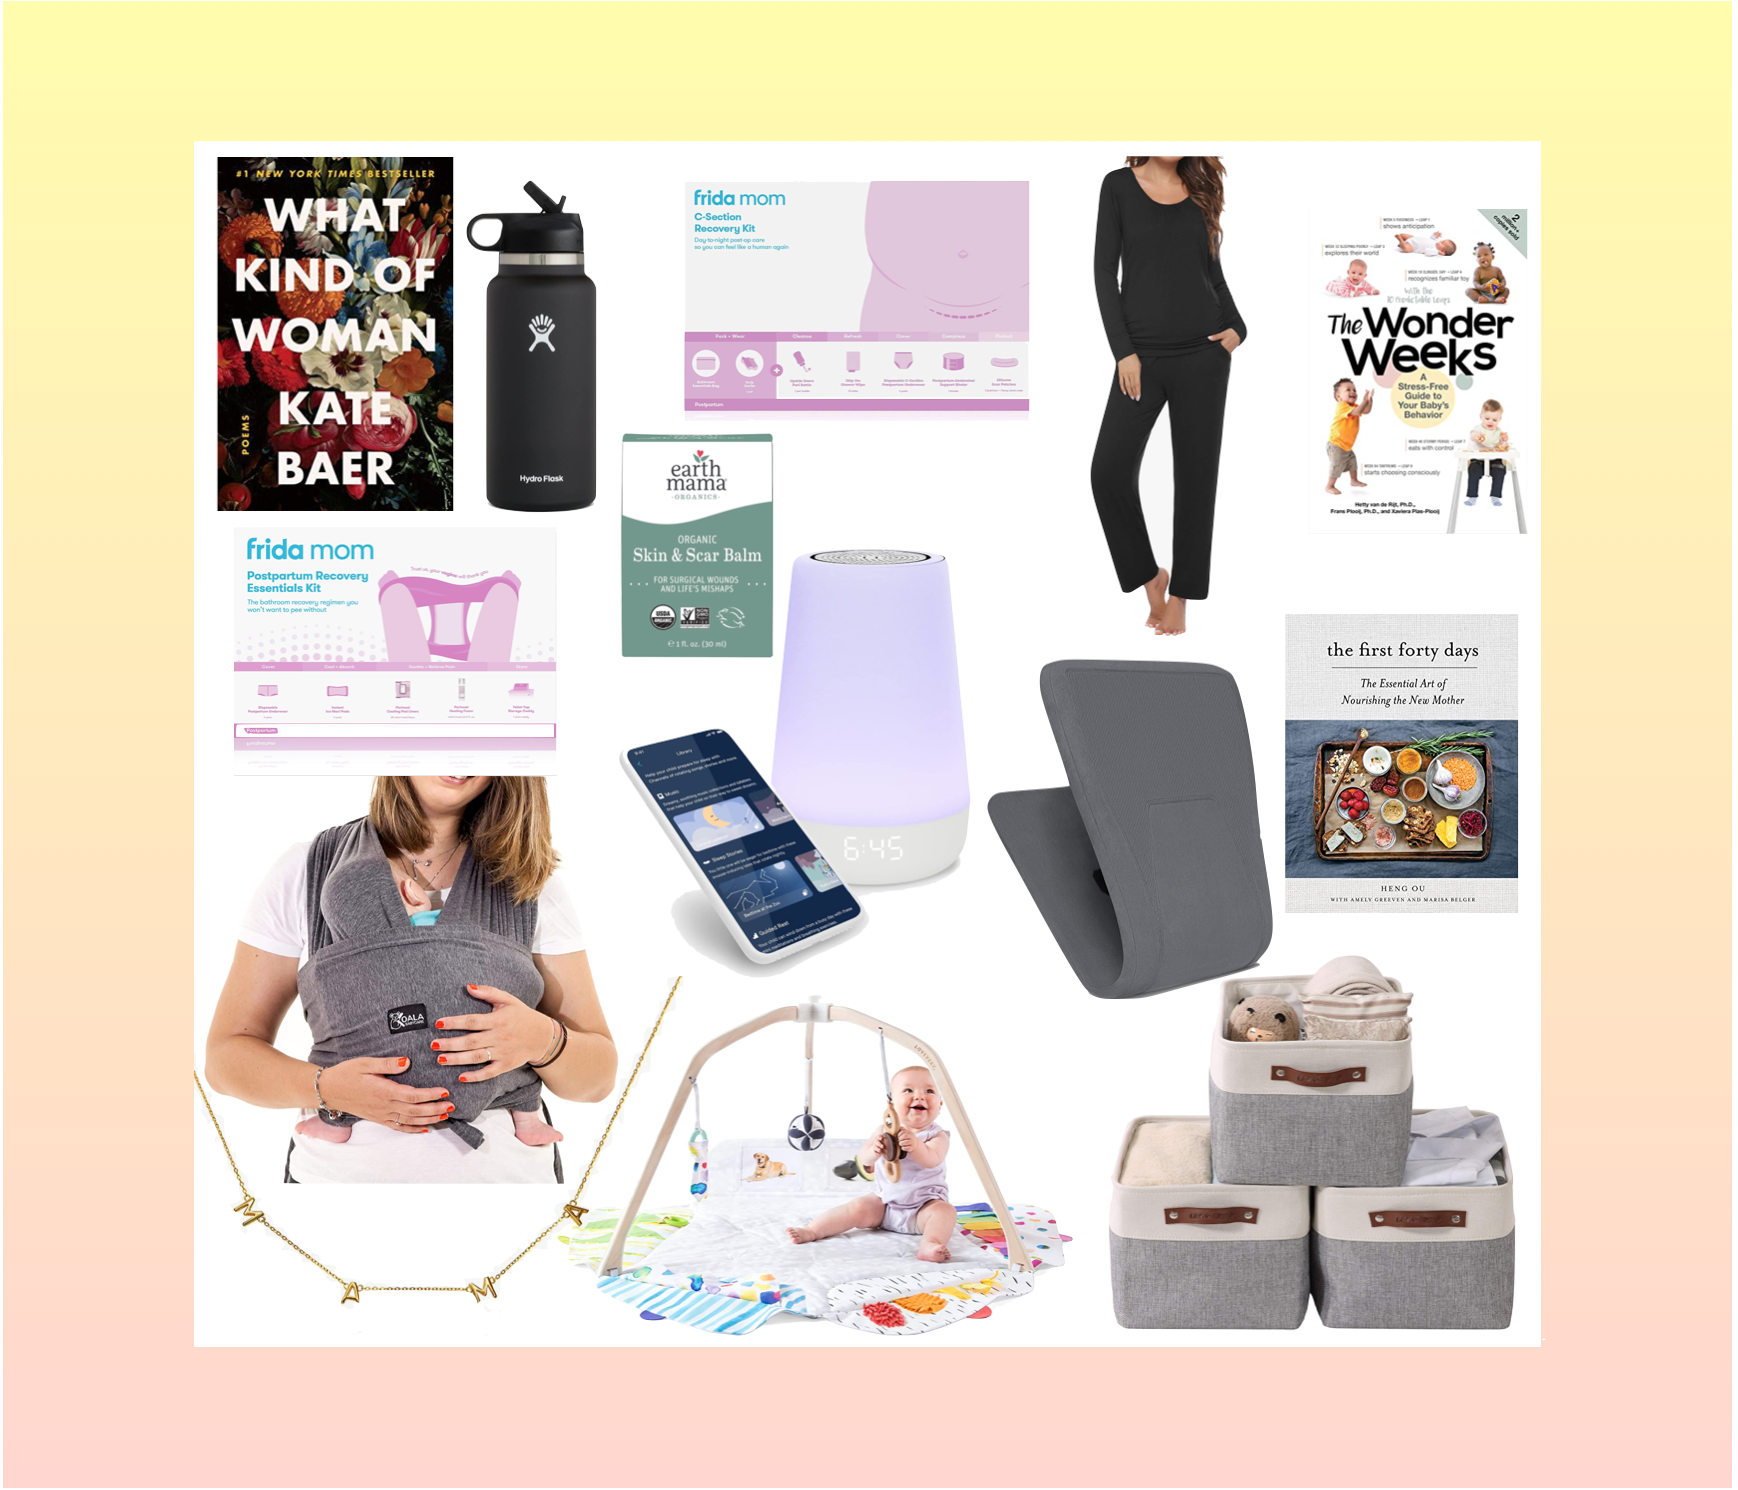 30 Gift Ideas Moms Really Want For Mother's Day